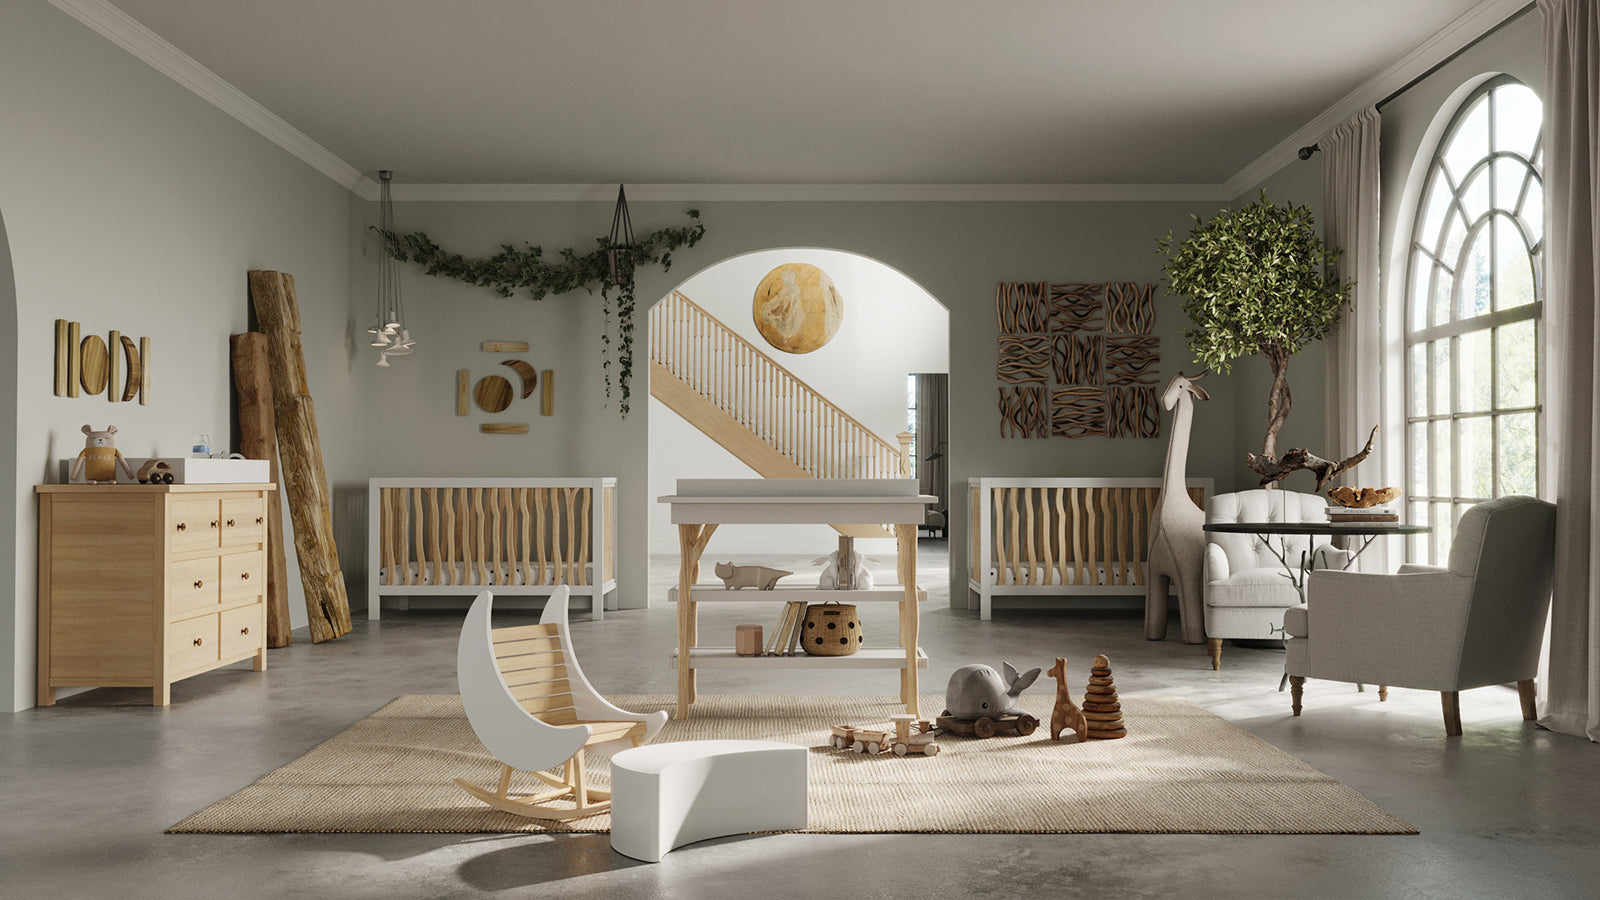 Nursery Furniture - Cots, Room Sets and Highchairs